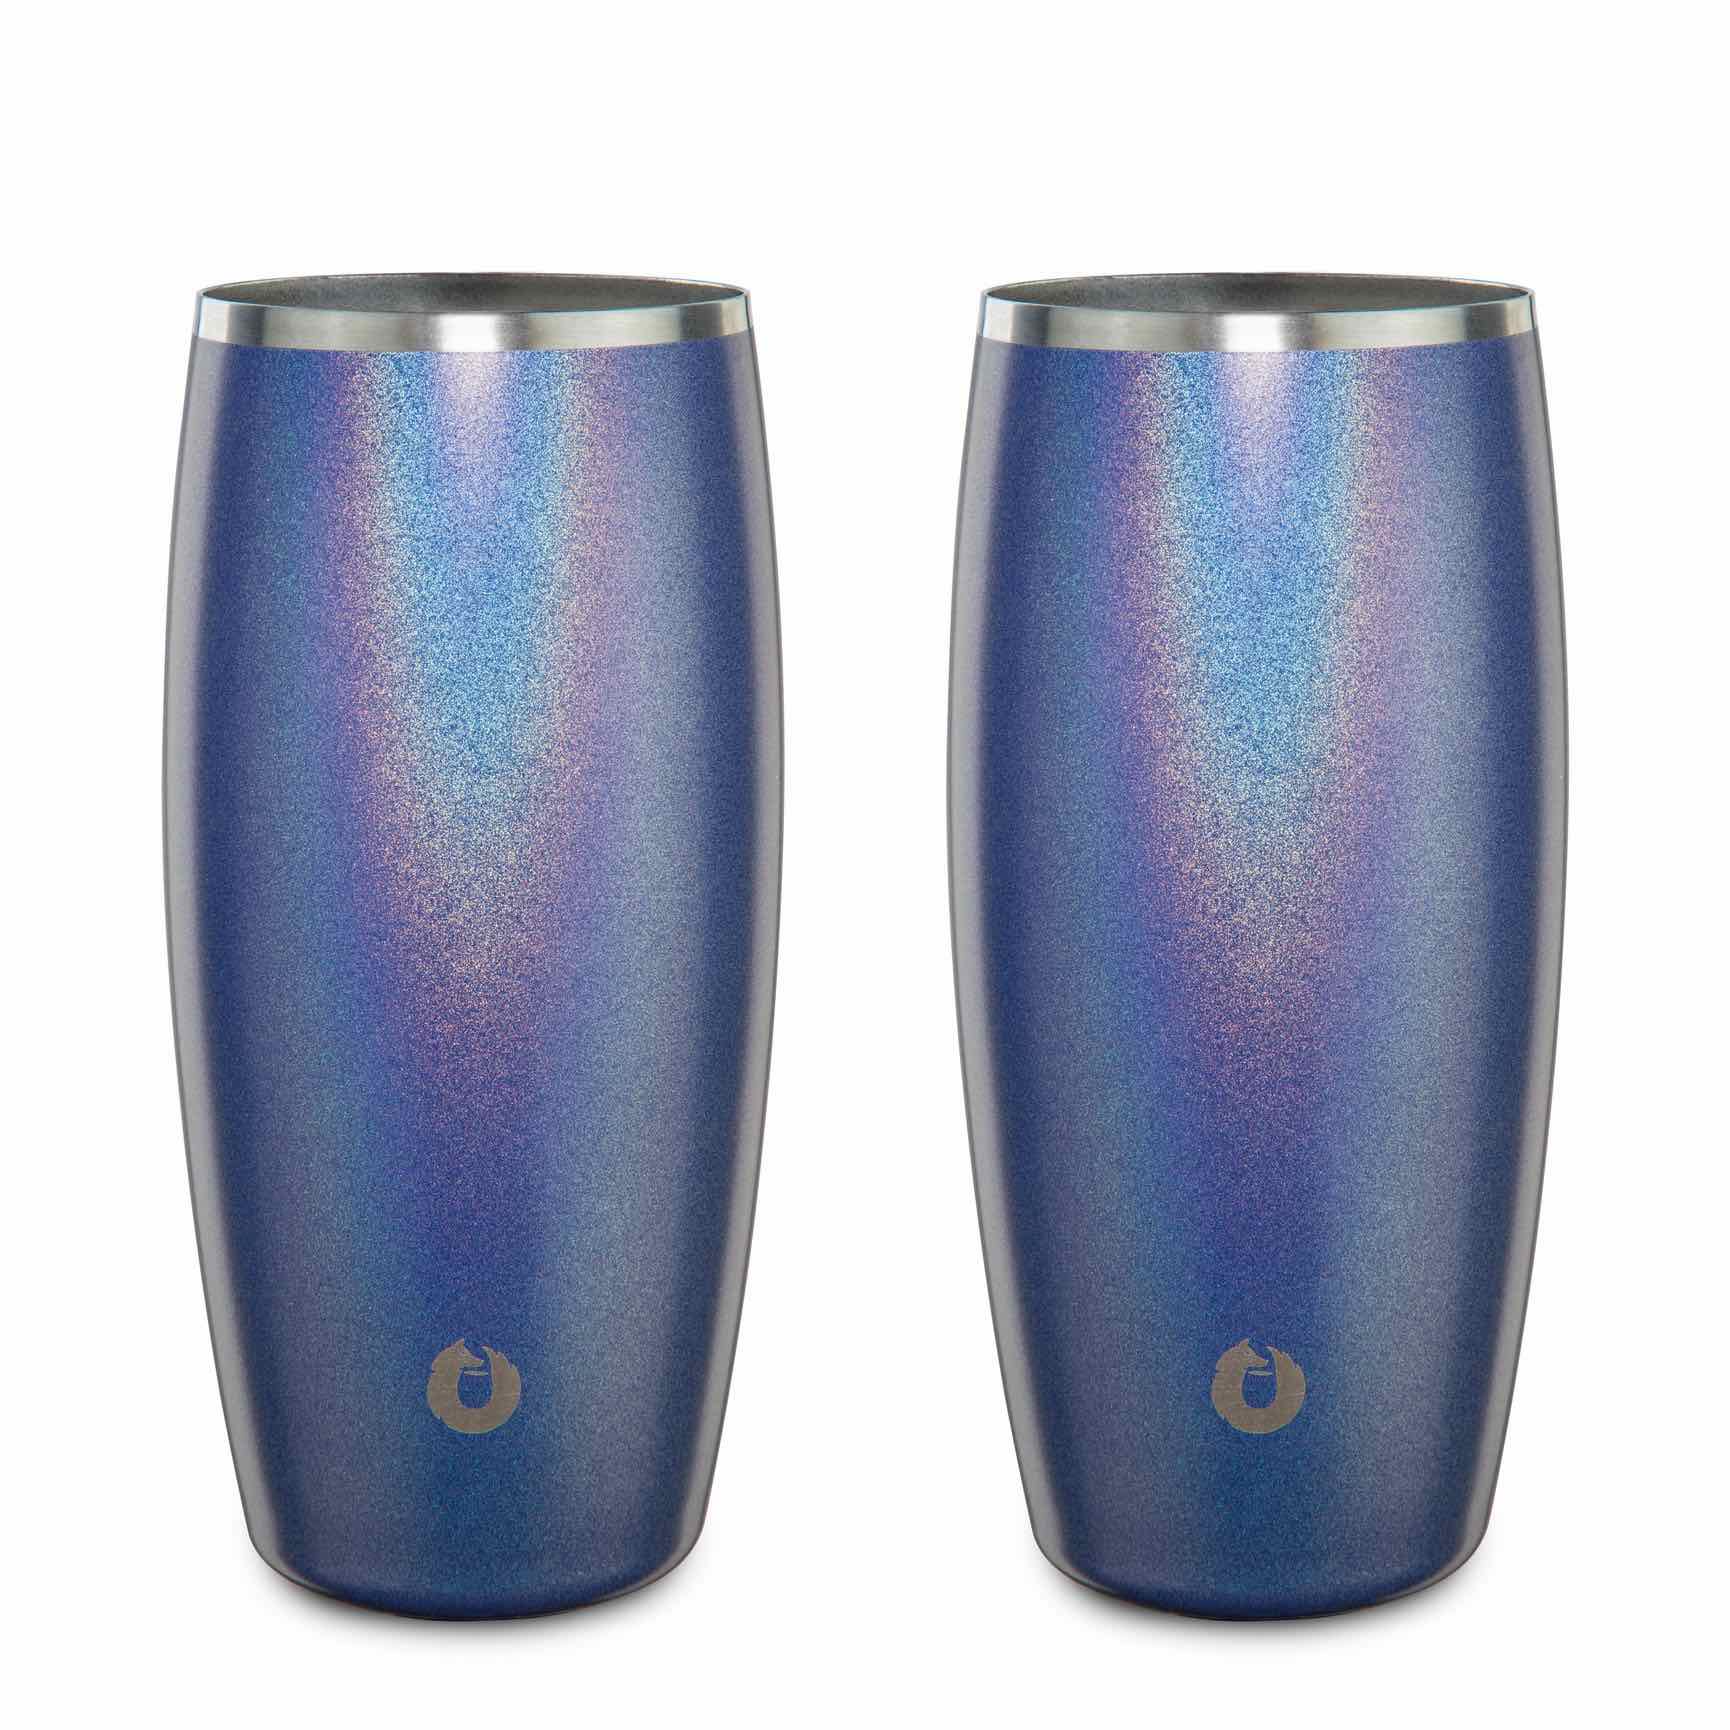 Stainless Steel Beer Glass, Set of 2 – Shimmer Blue